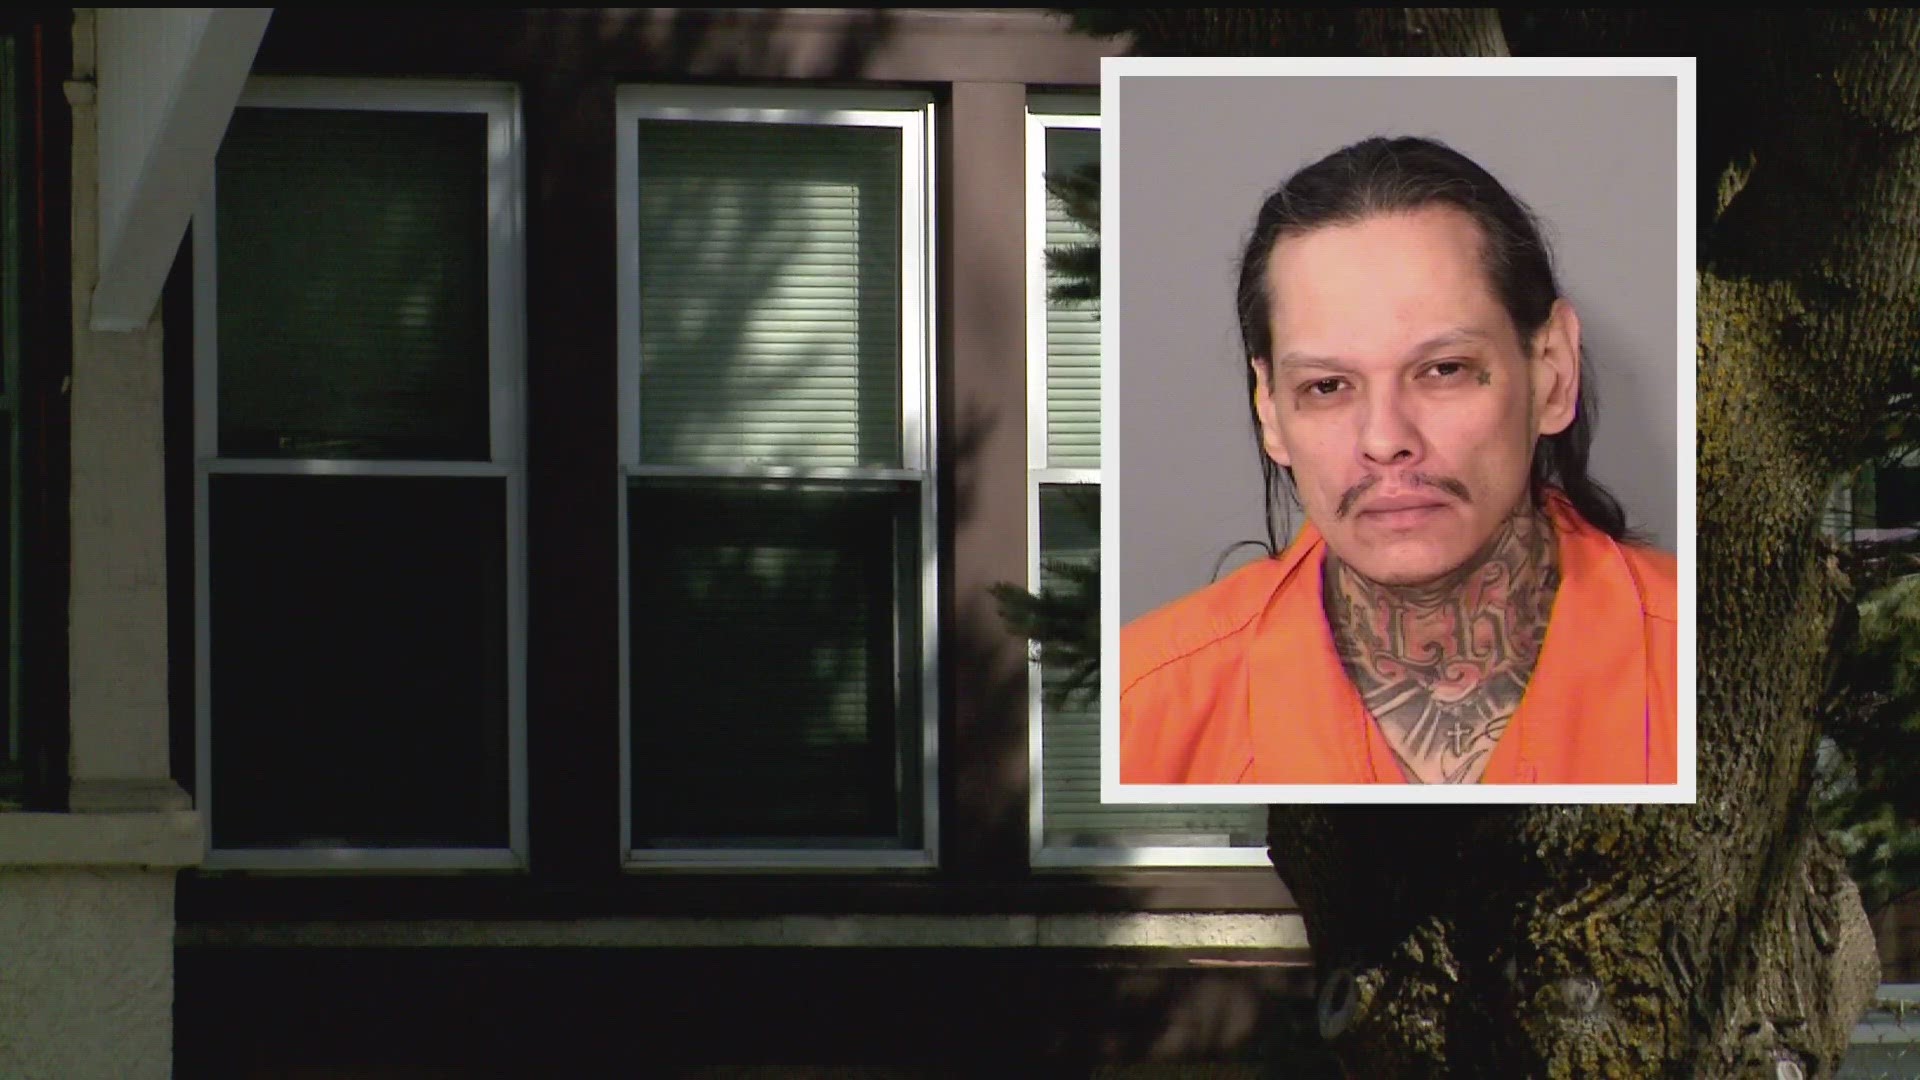 Witnesses say the couple was at a family member's St. Paul home and seemed to be getting along before Robert Castillo allegedly stabbed his wife repeatedly.